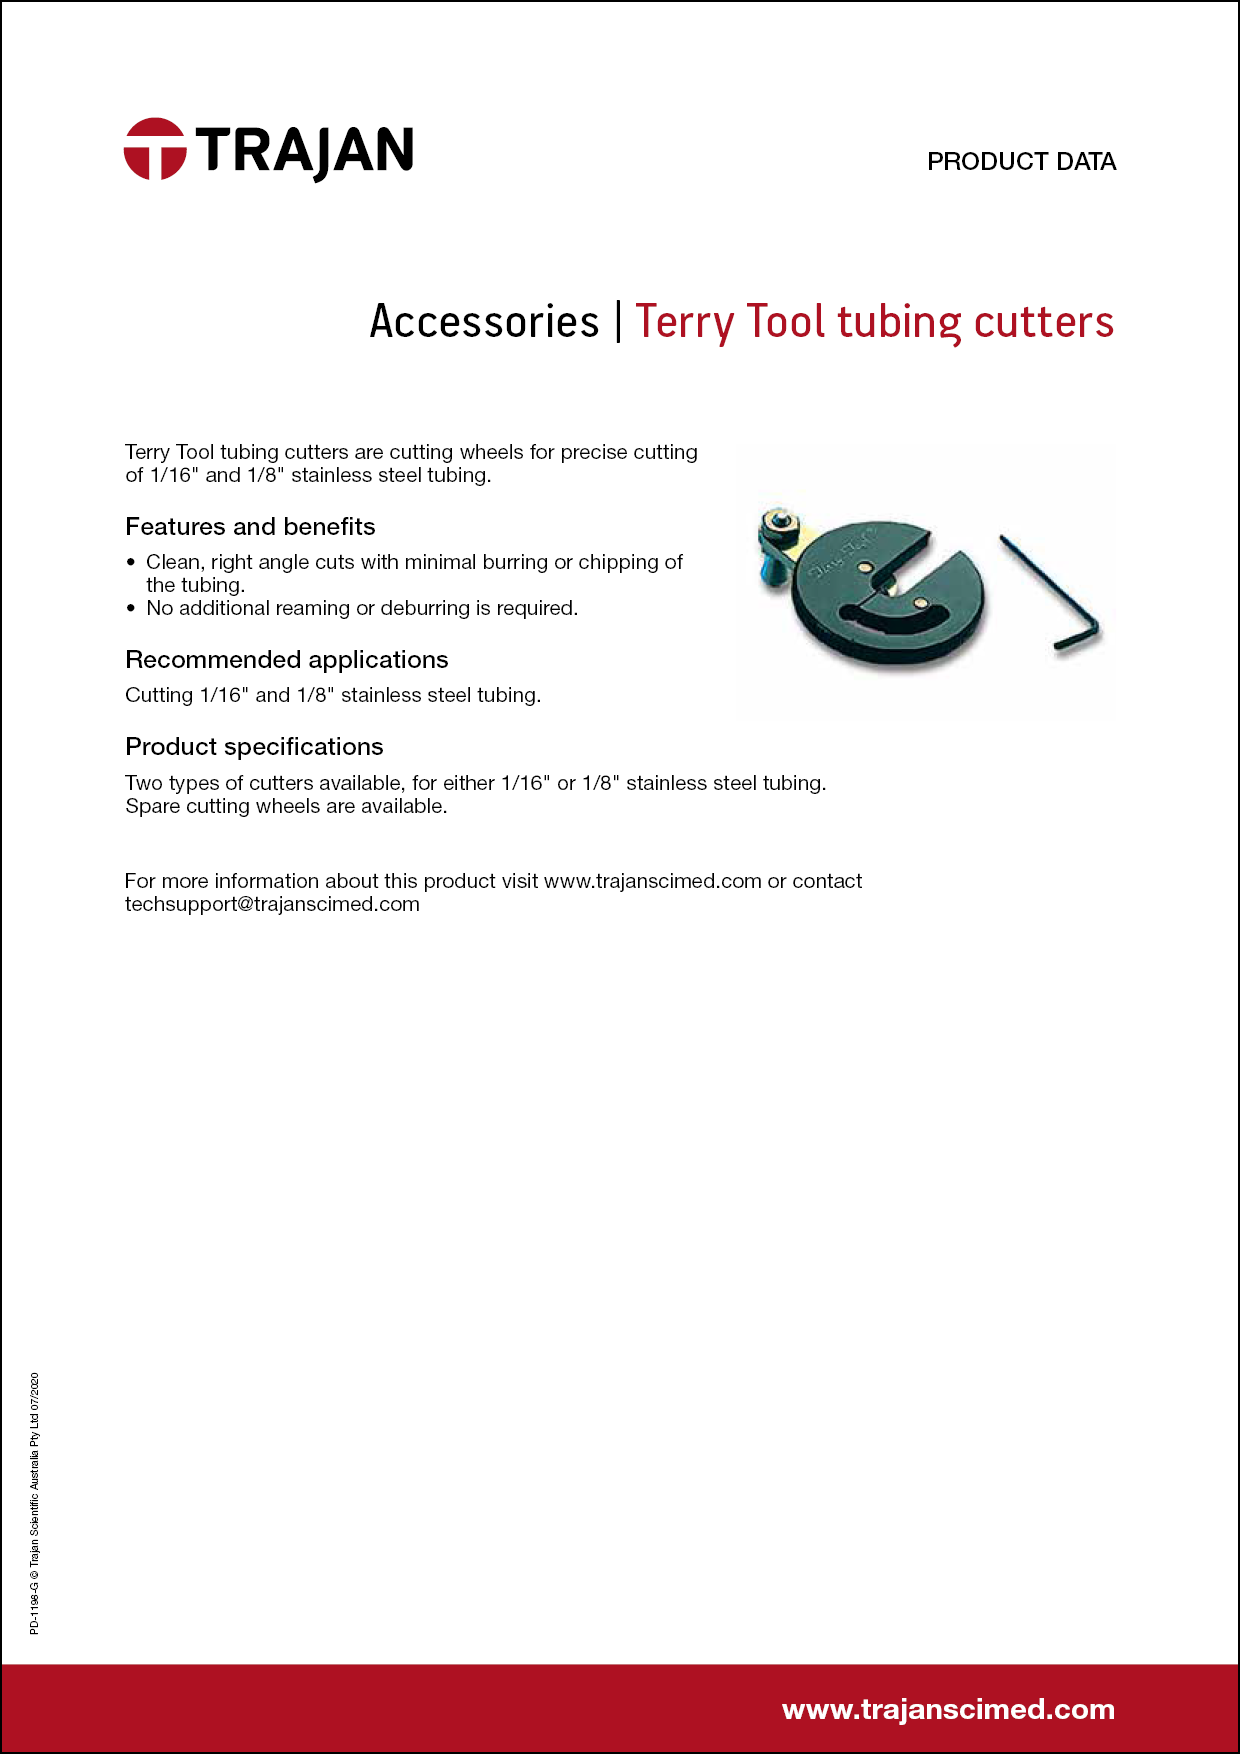 Product Data Sheet - Terry Tool tubing cutters